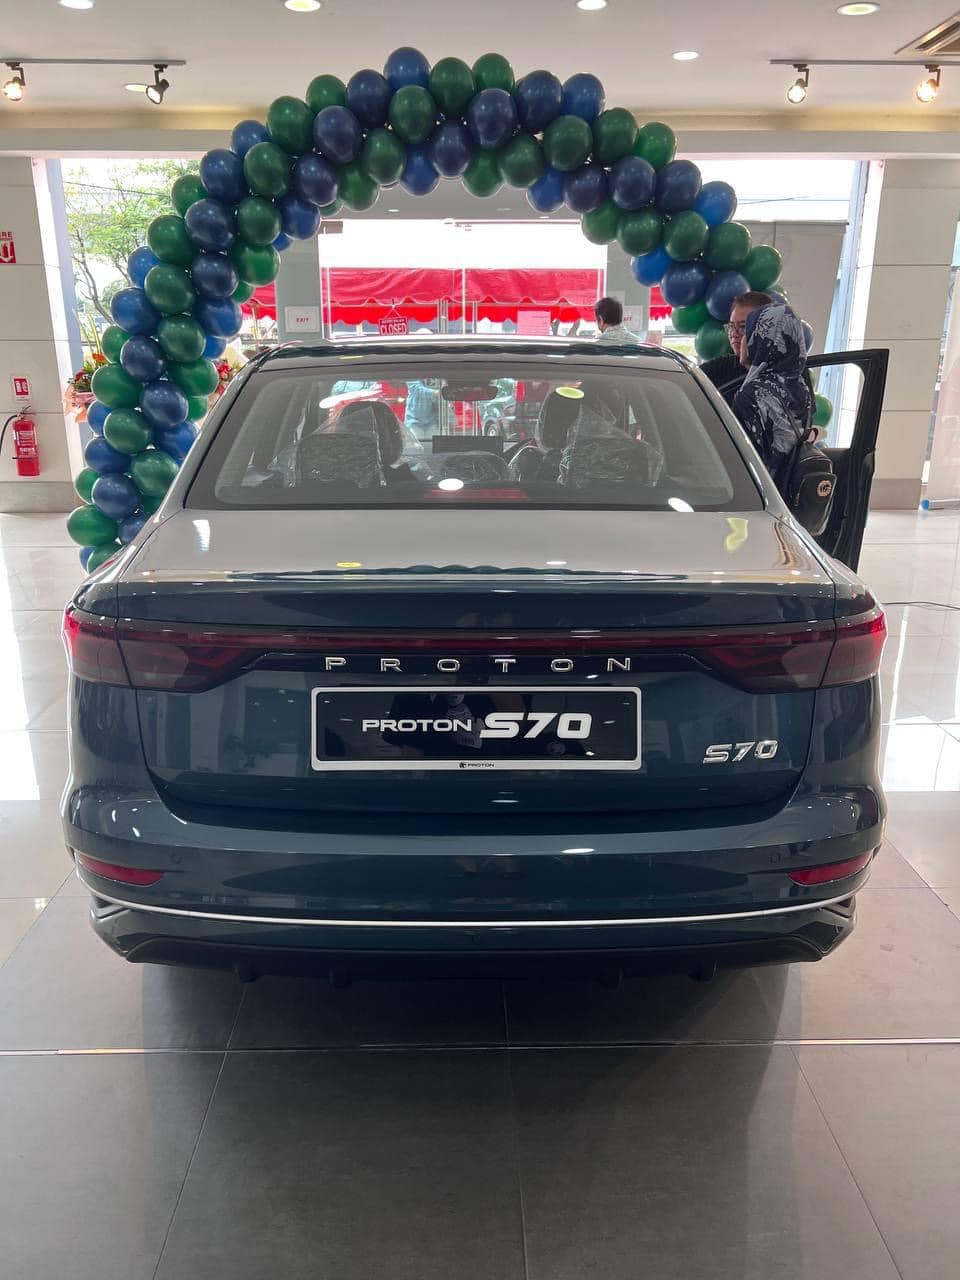 Proton s70 in a showroom